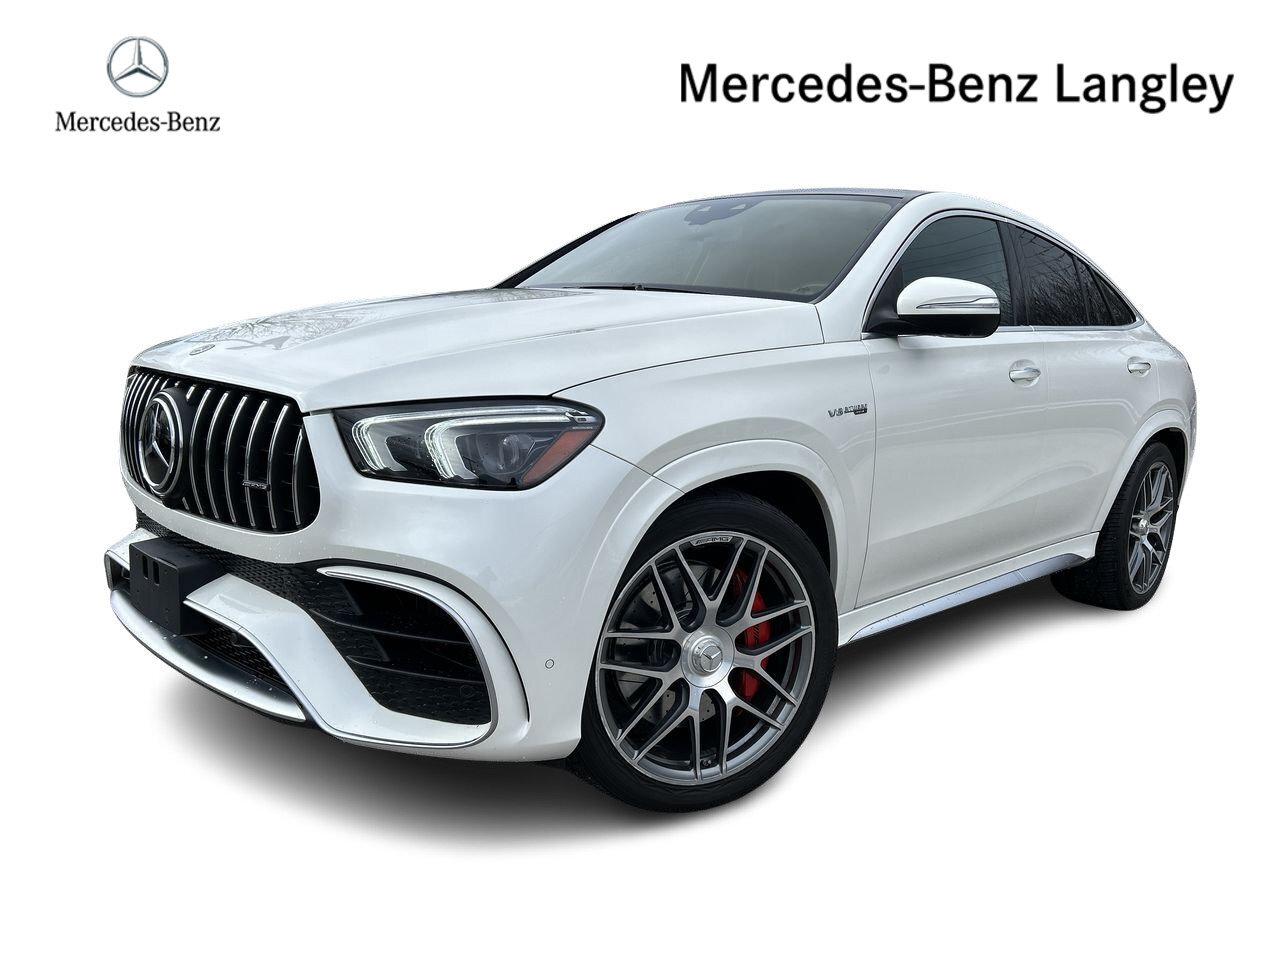 2021 Mercedes-Benz GLE63 AMG S 4MATIC+ Coupe AMG power, family practical!